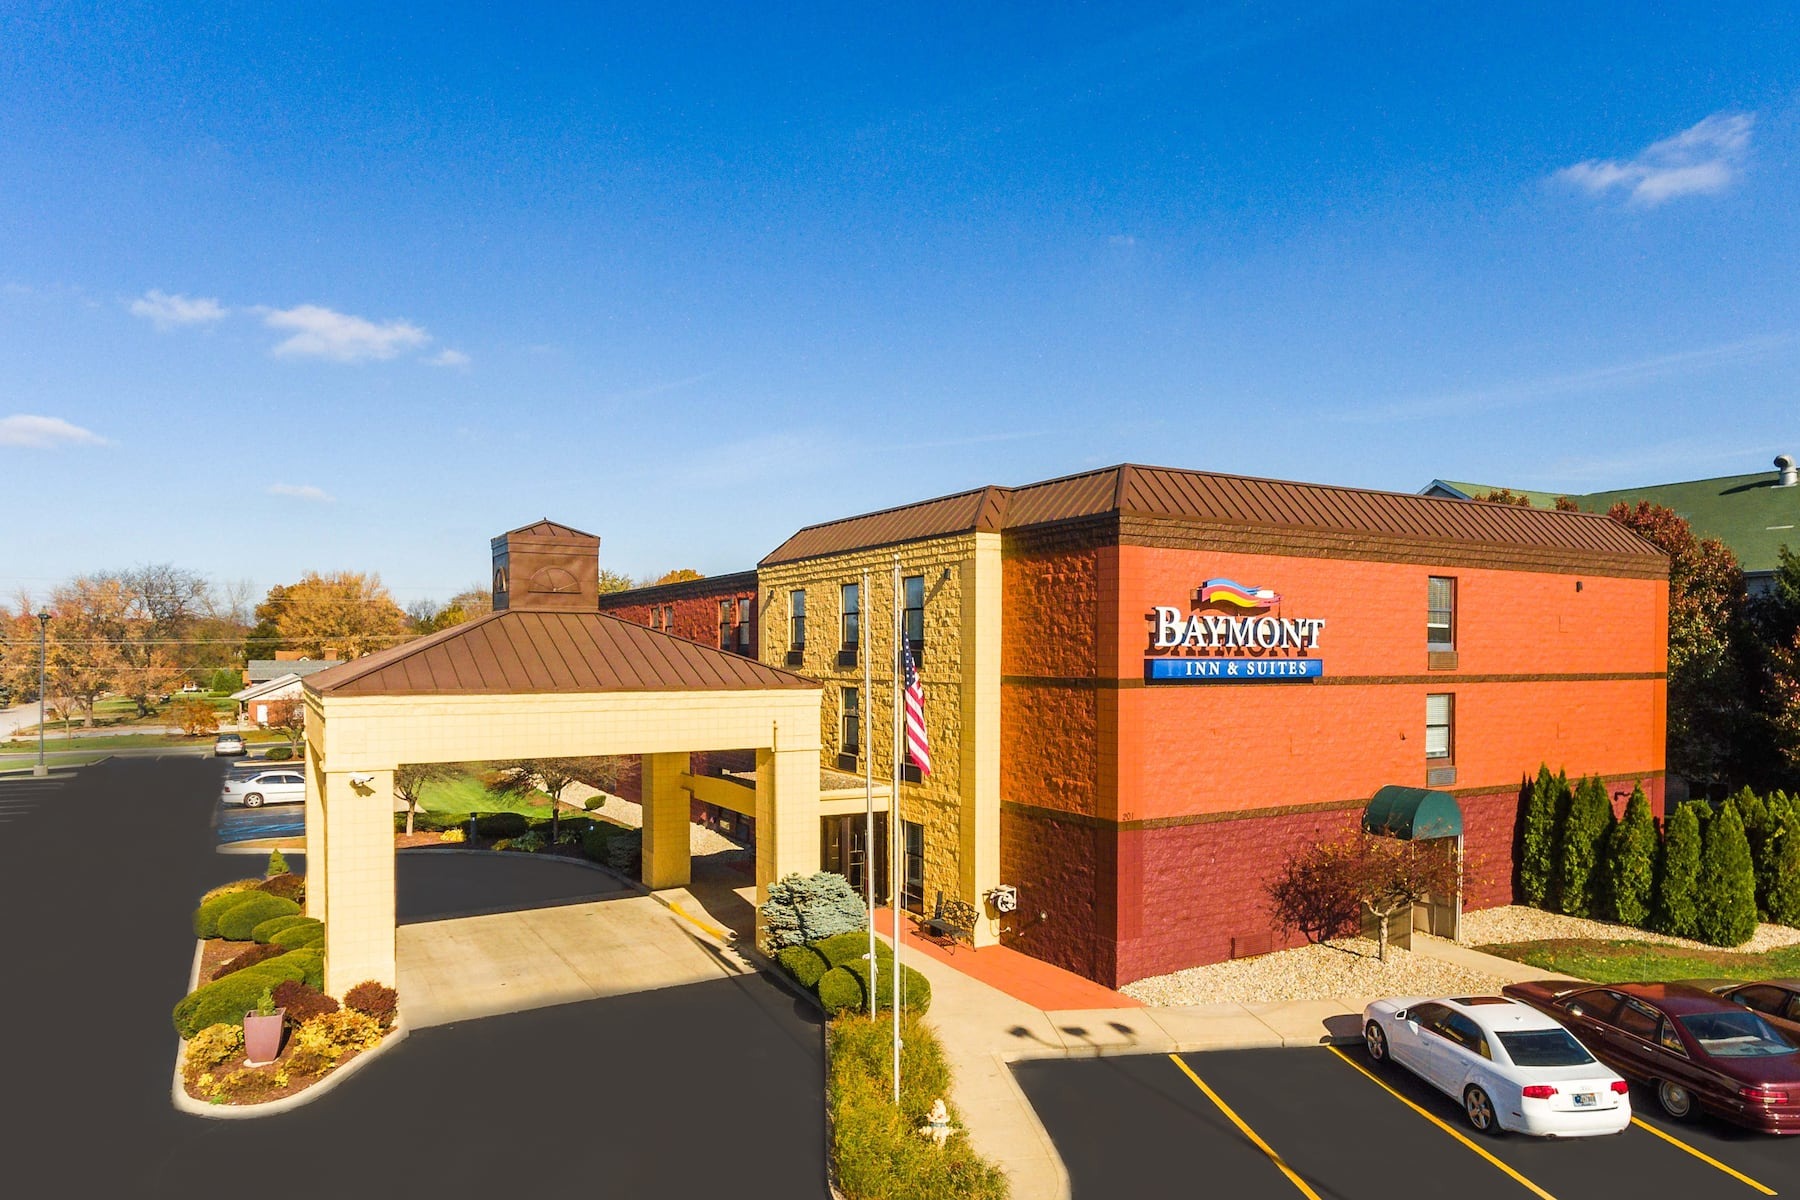 Baymont Inn & Suites by Wyndham Lafayette / Purdue Area Hotel Exterior - Welcoming Accommodation